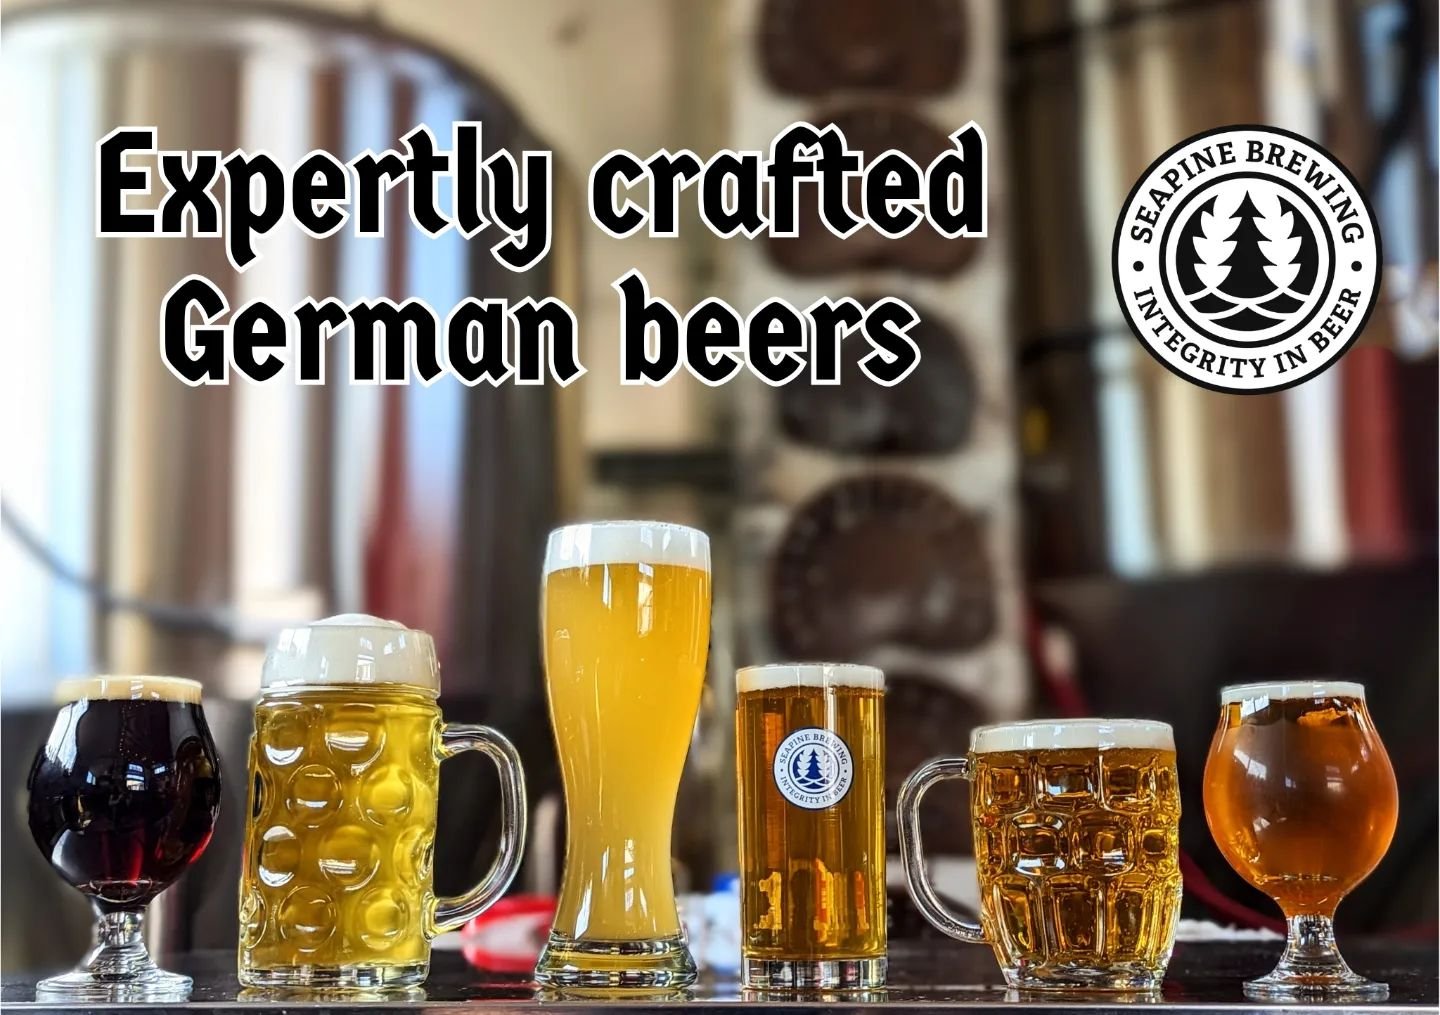 Pilsner, Maibock, Hefeweizen, Doppelbock, Kolsch, Helles Lager all brewed right here in Sodo, all pouring right now at our taproom! Stop by for a stein or 2 this weekend 🍻🇩🇪🇺🇸
#craftbeerlover #germanbier #craftbrewery #craftbeerlife #seattlecraf